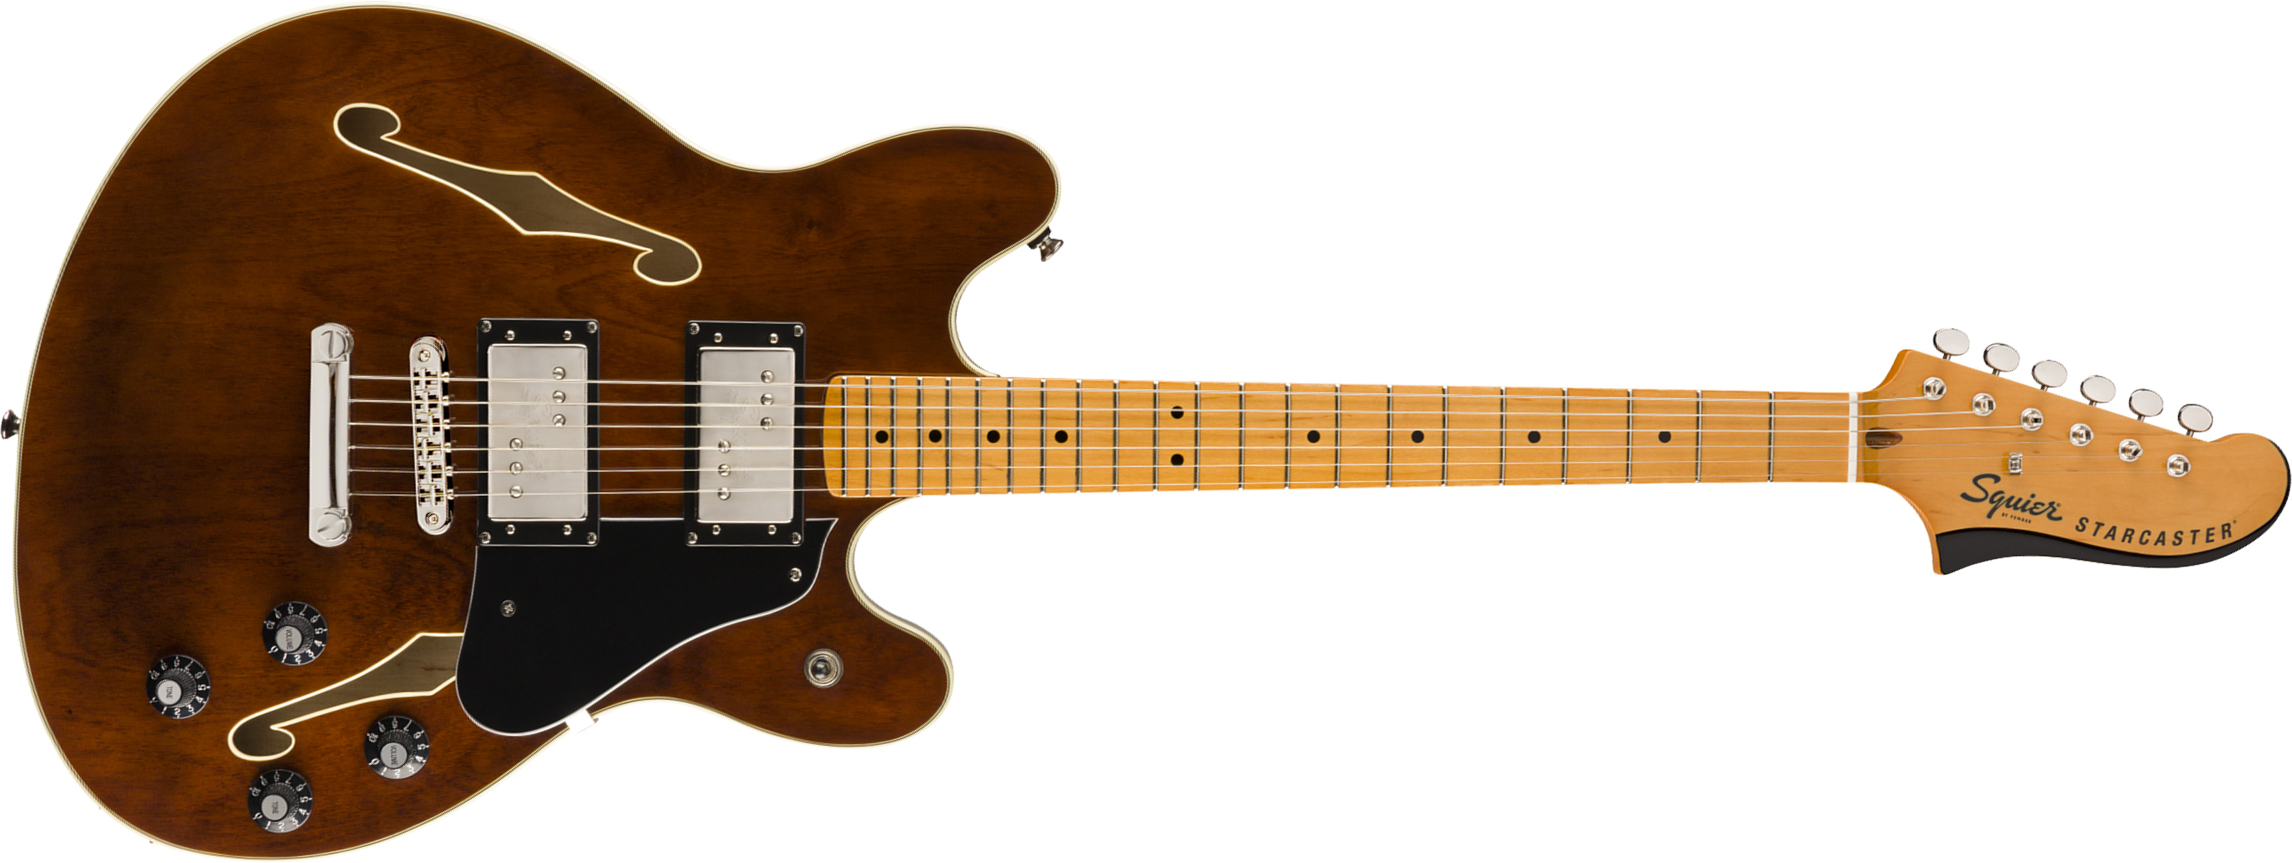 Squier Starcaster Classic Vibe 2019 Hh Ht Mn - Walnut - Semi-hollow electric guitar - Main picture